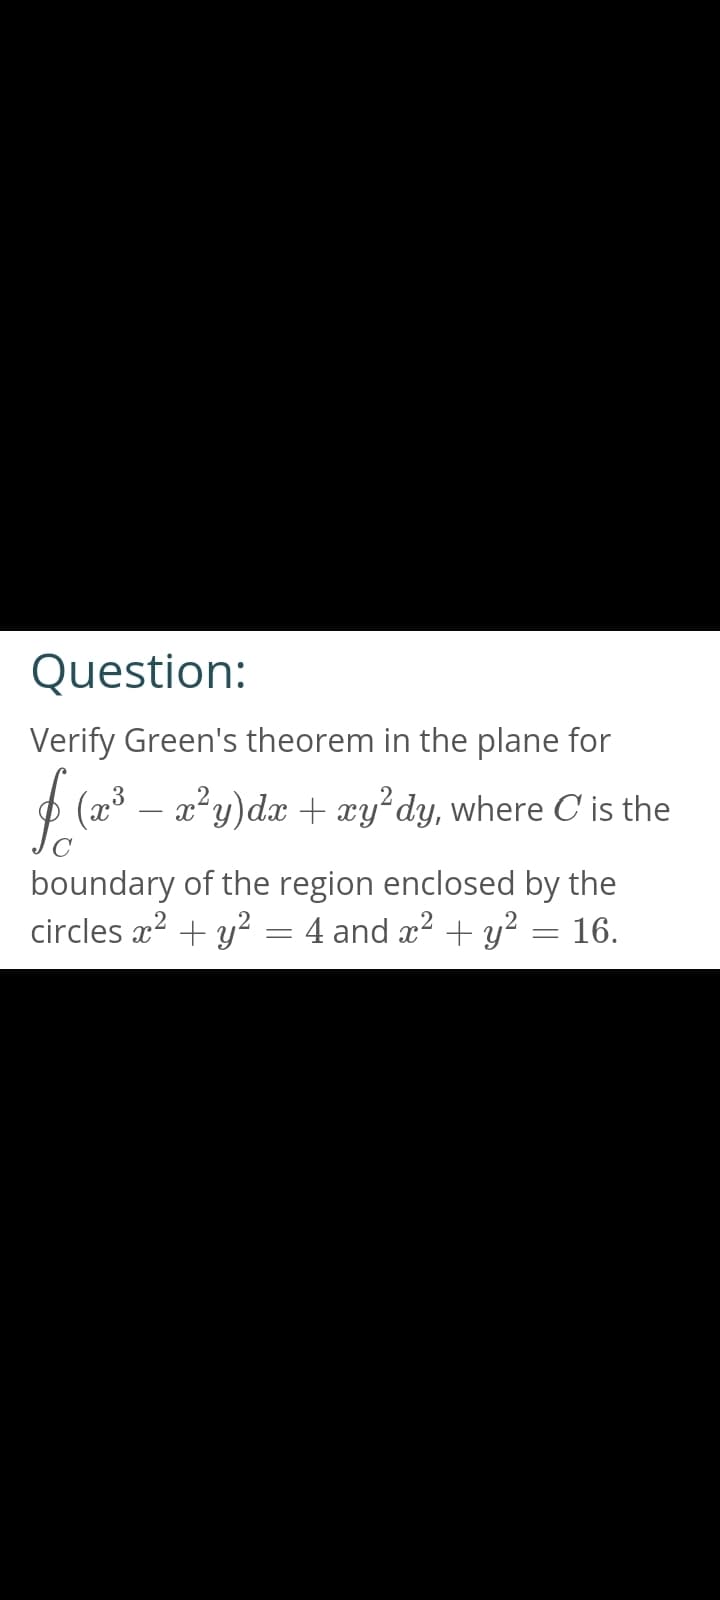 Question:
Verify Green's theorem in the plane for
$ (2013
(x x²y)dx + xy² dy, where C' is the
boundary of the region enclosed by the
circles x² + y² = 4 and x² + y² = 16.